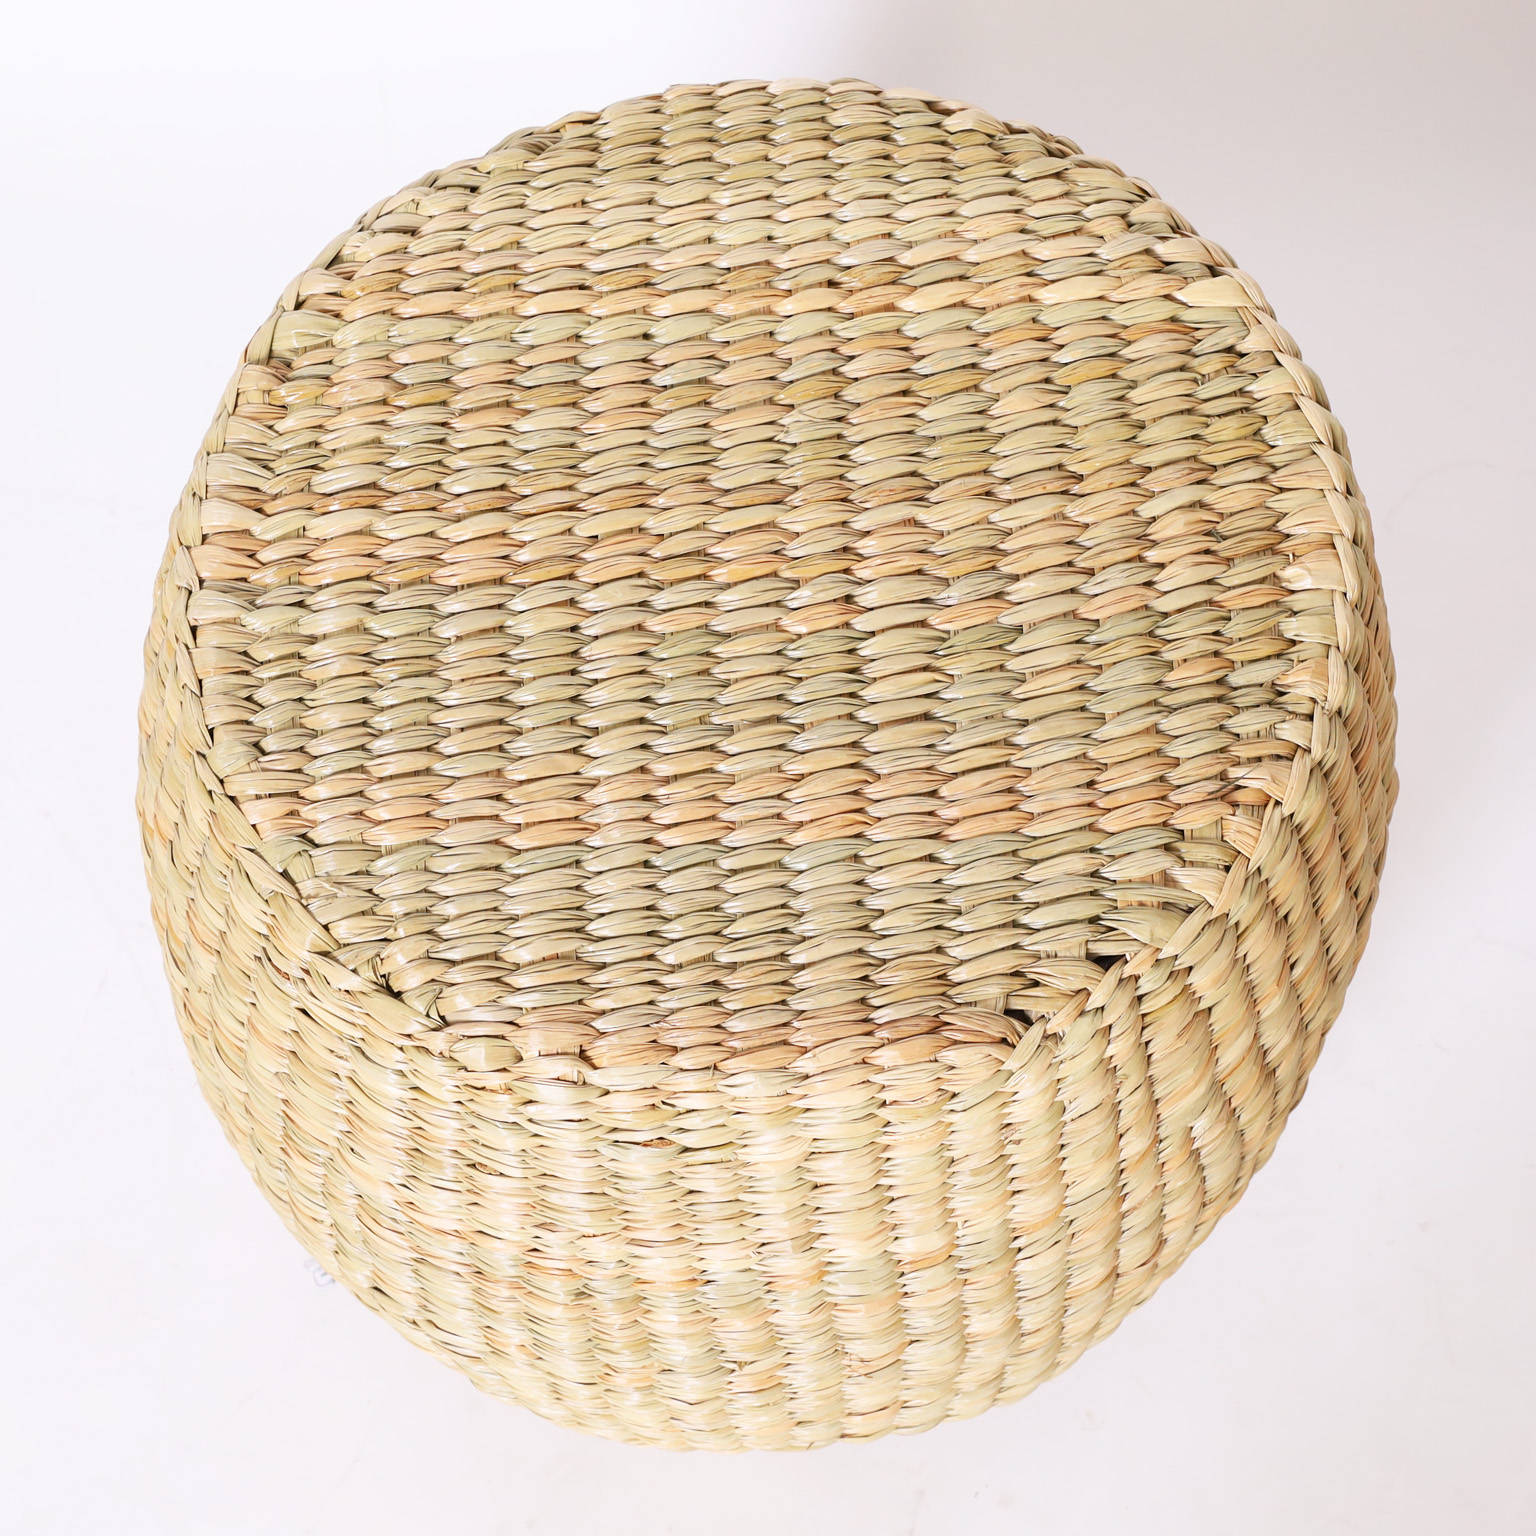 Pair of Woven Reed Garden Seats from the FS Flores Collection